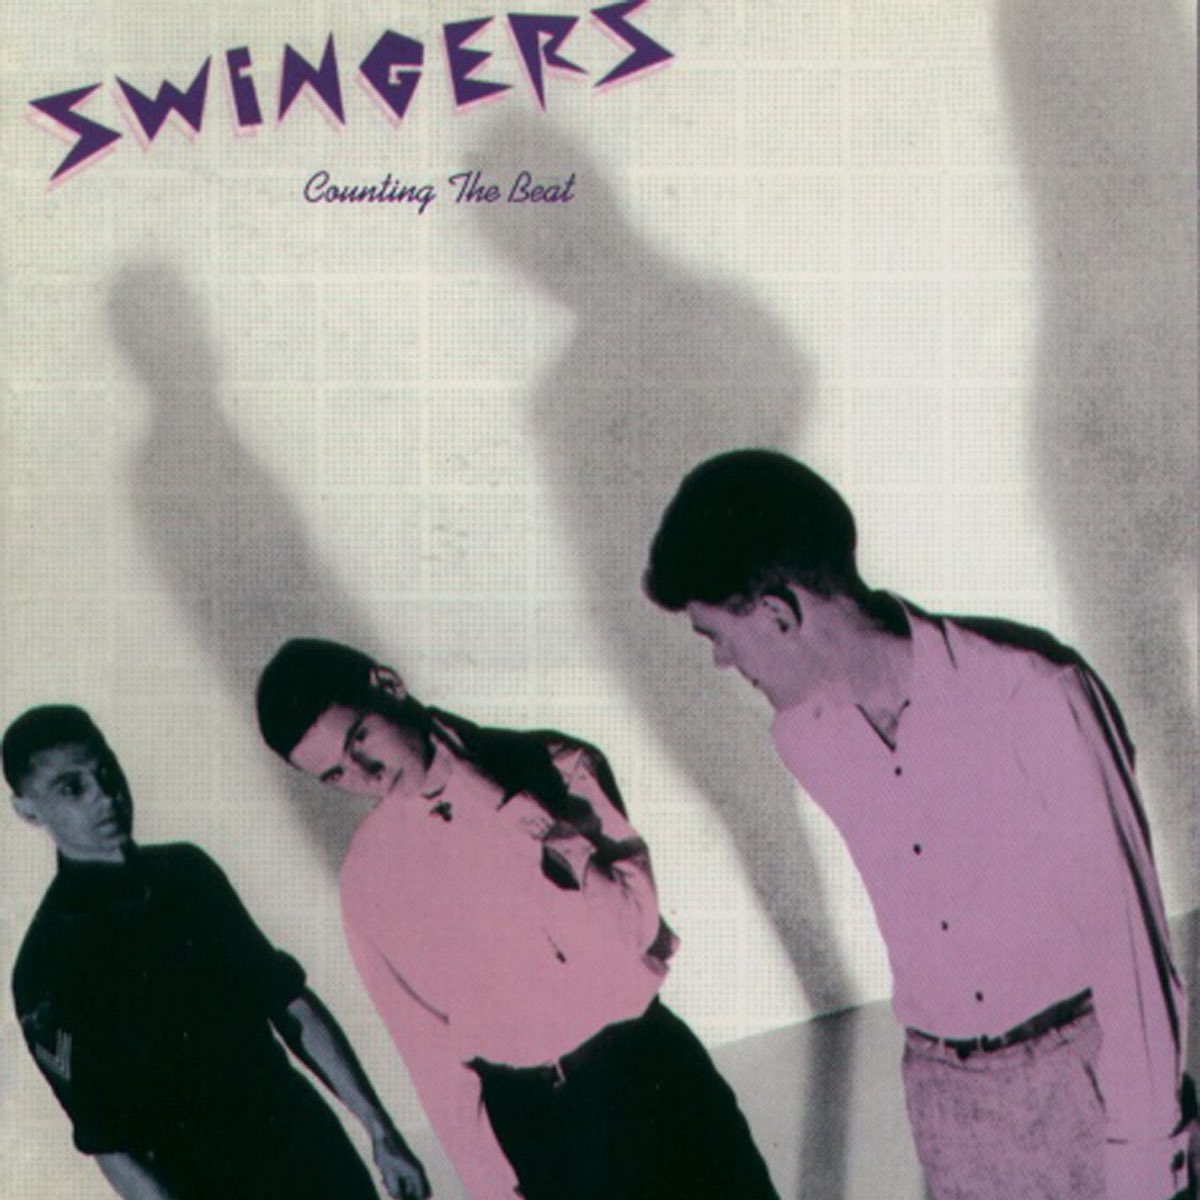 counting the beat the swingers Sex Images Hq